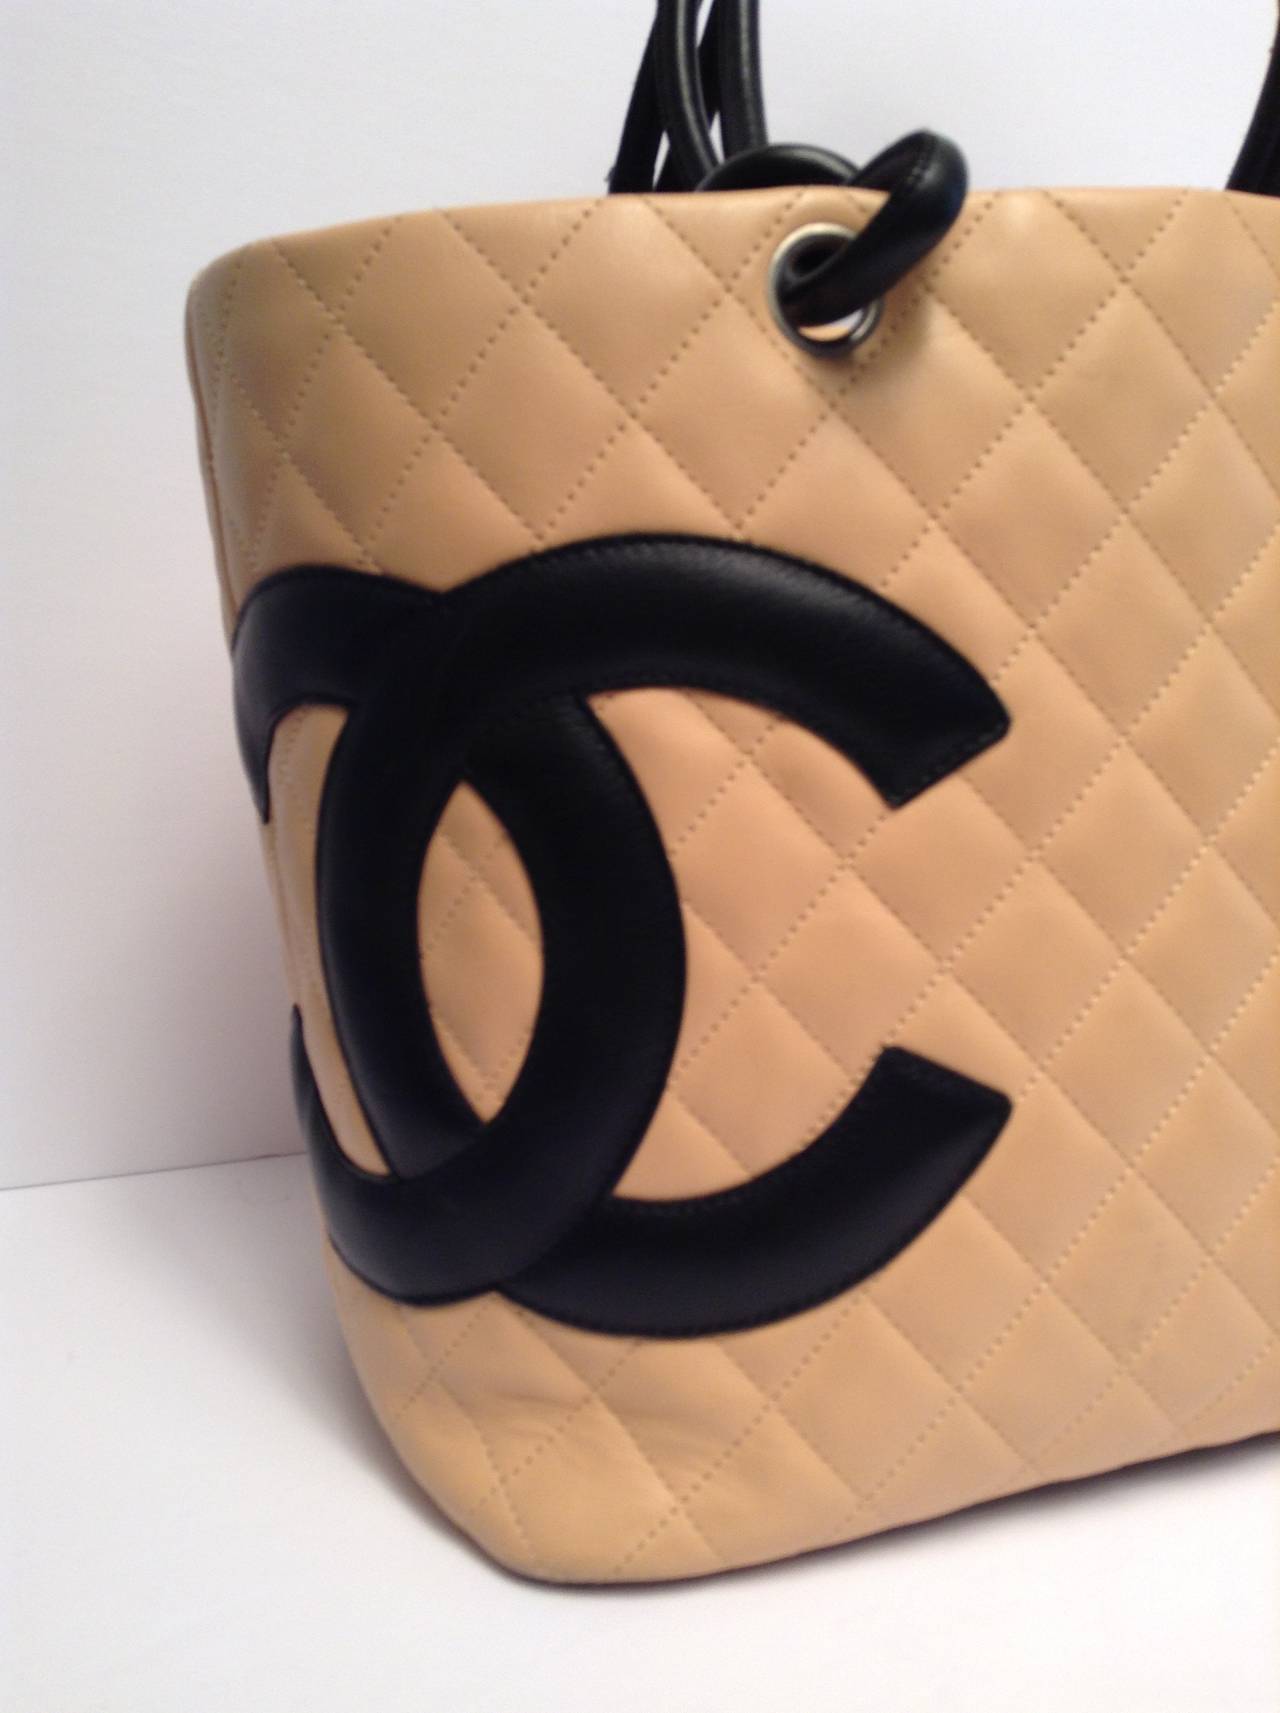 This is a chic and stylish bag from the Chanel Ligne Cambon collection and is very popular among Chanel lovers everywhere. The beige quilted leather features a bold black leather CC logo and silver hardware. The interior is roomy with black lining